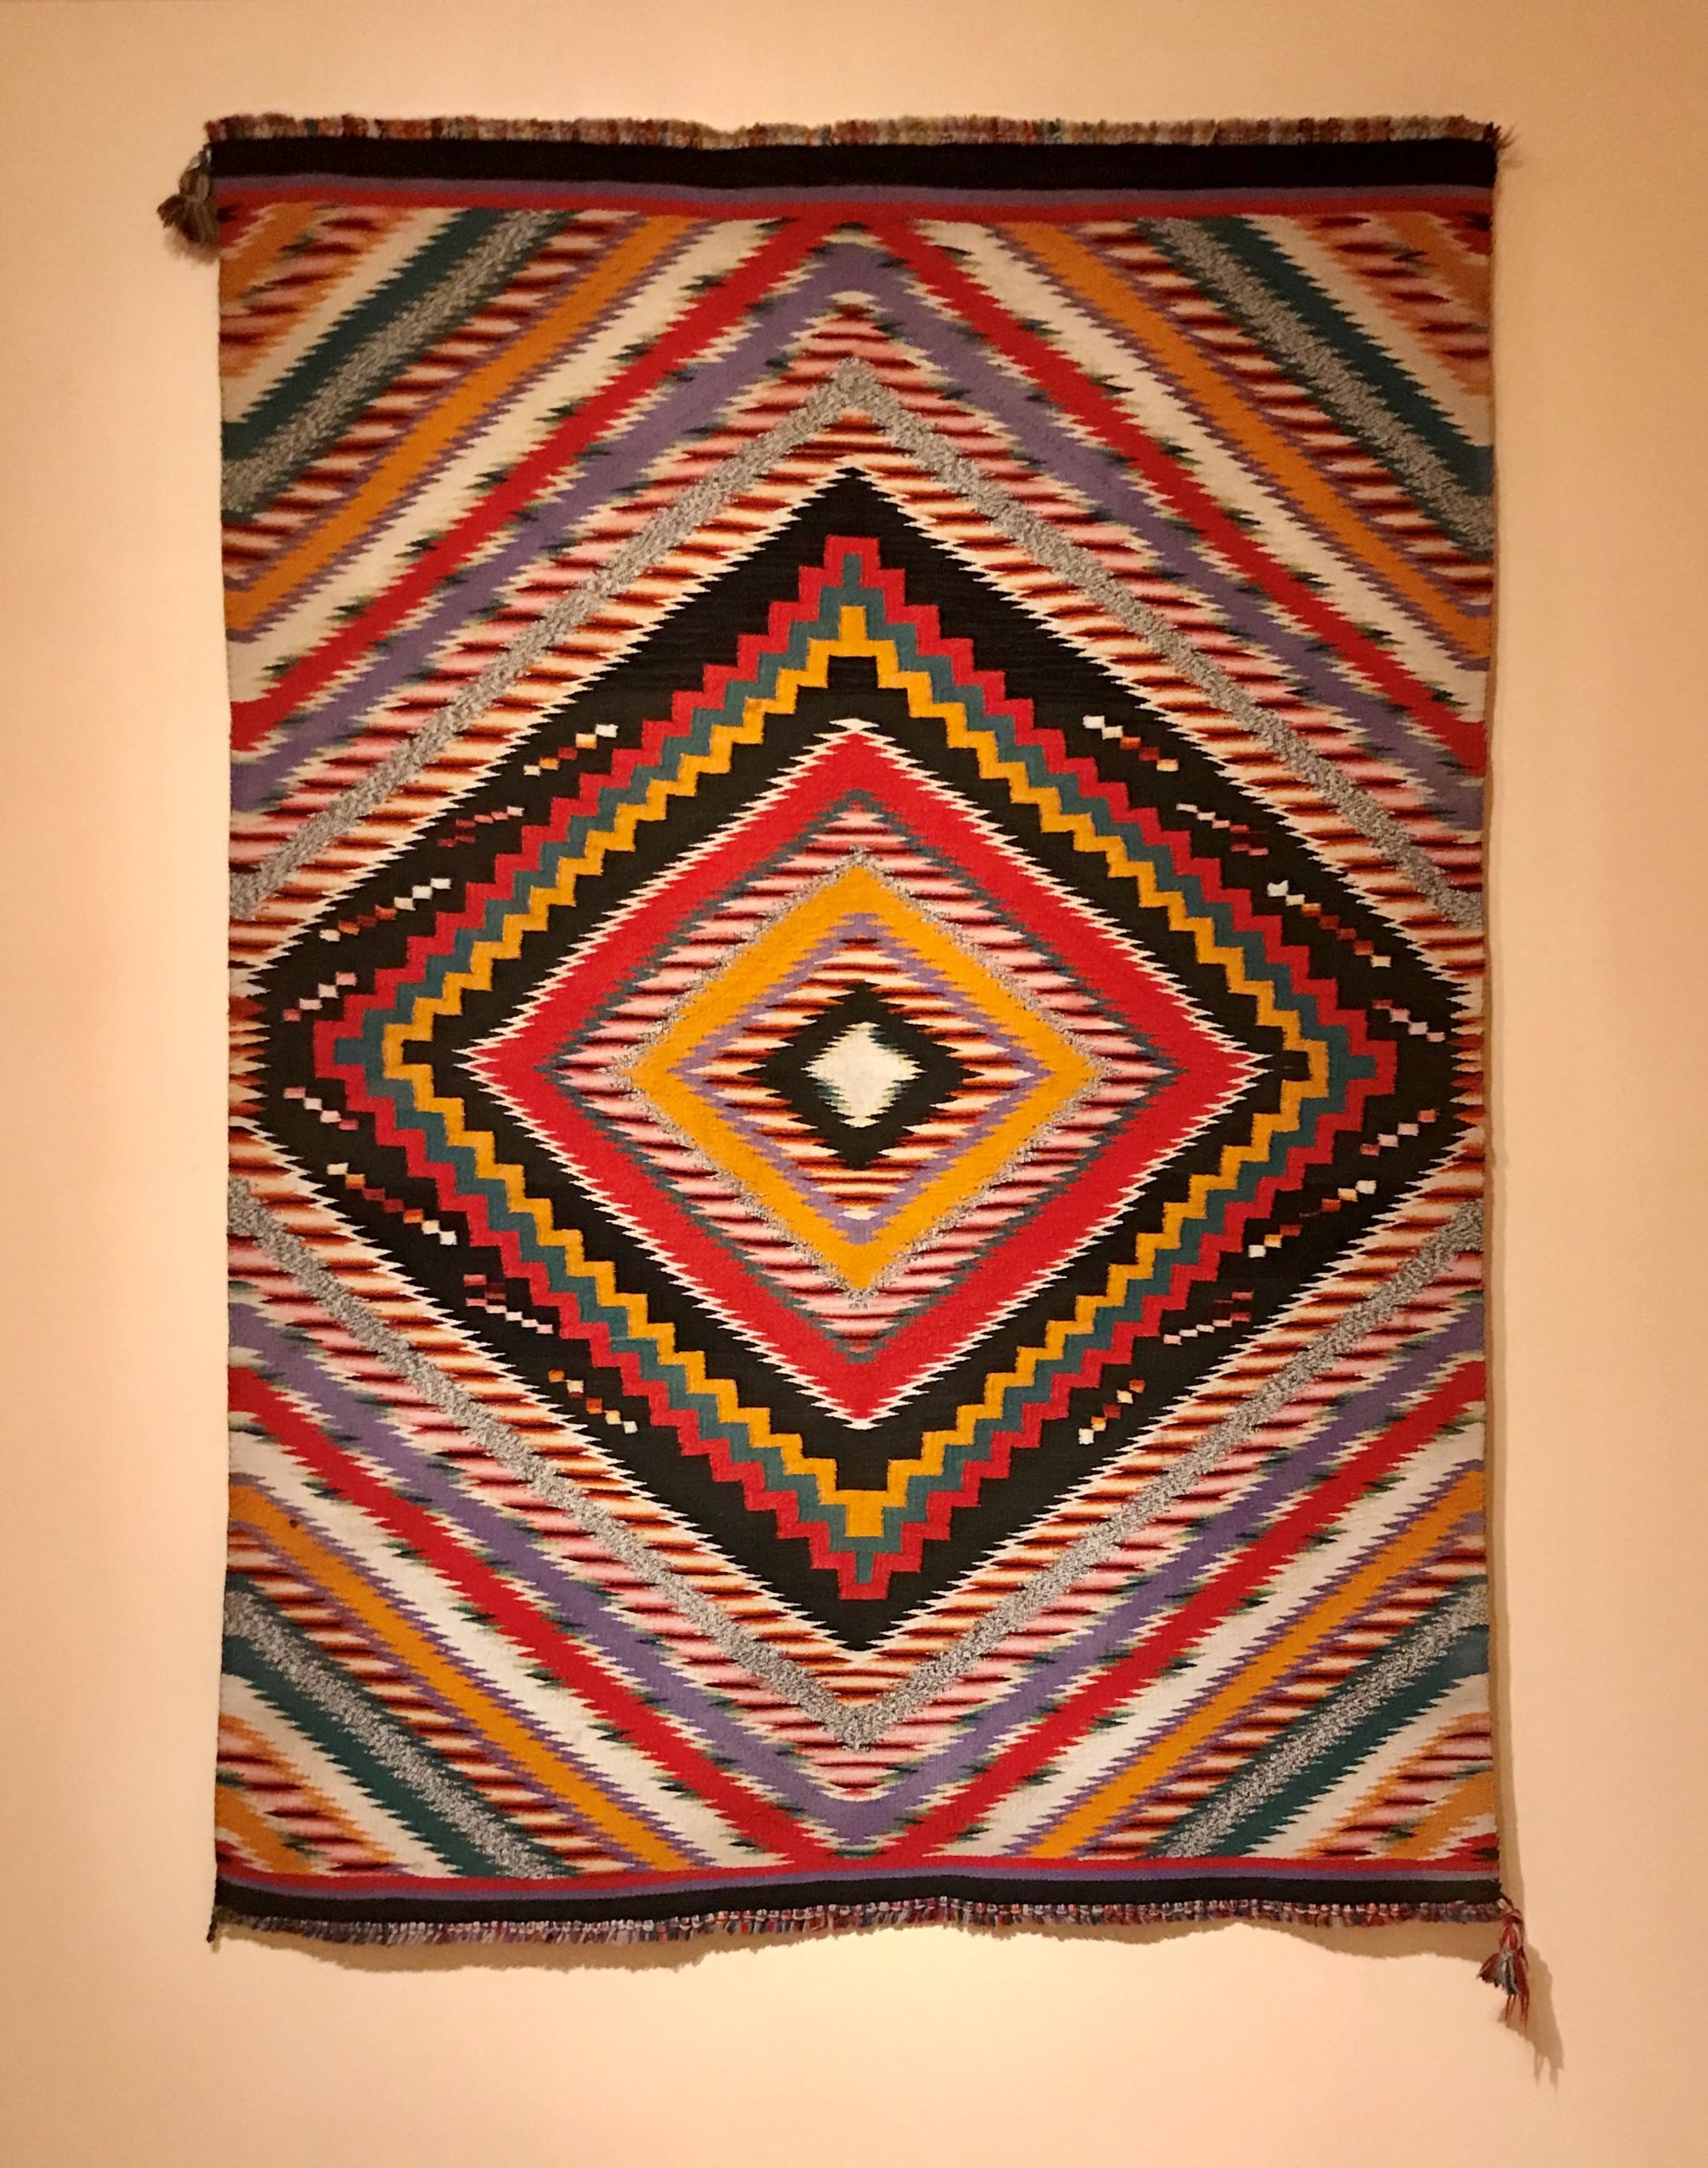 Colorful weaving hanging on a wall. The pattern is diamond-shaped and rendered primarily in black, yellow, and red.